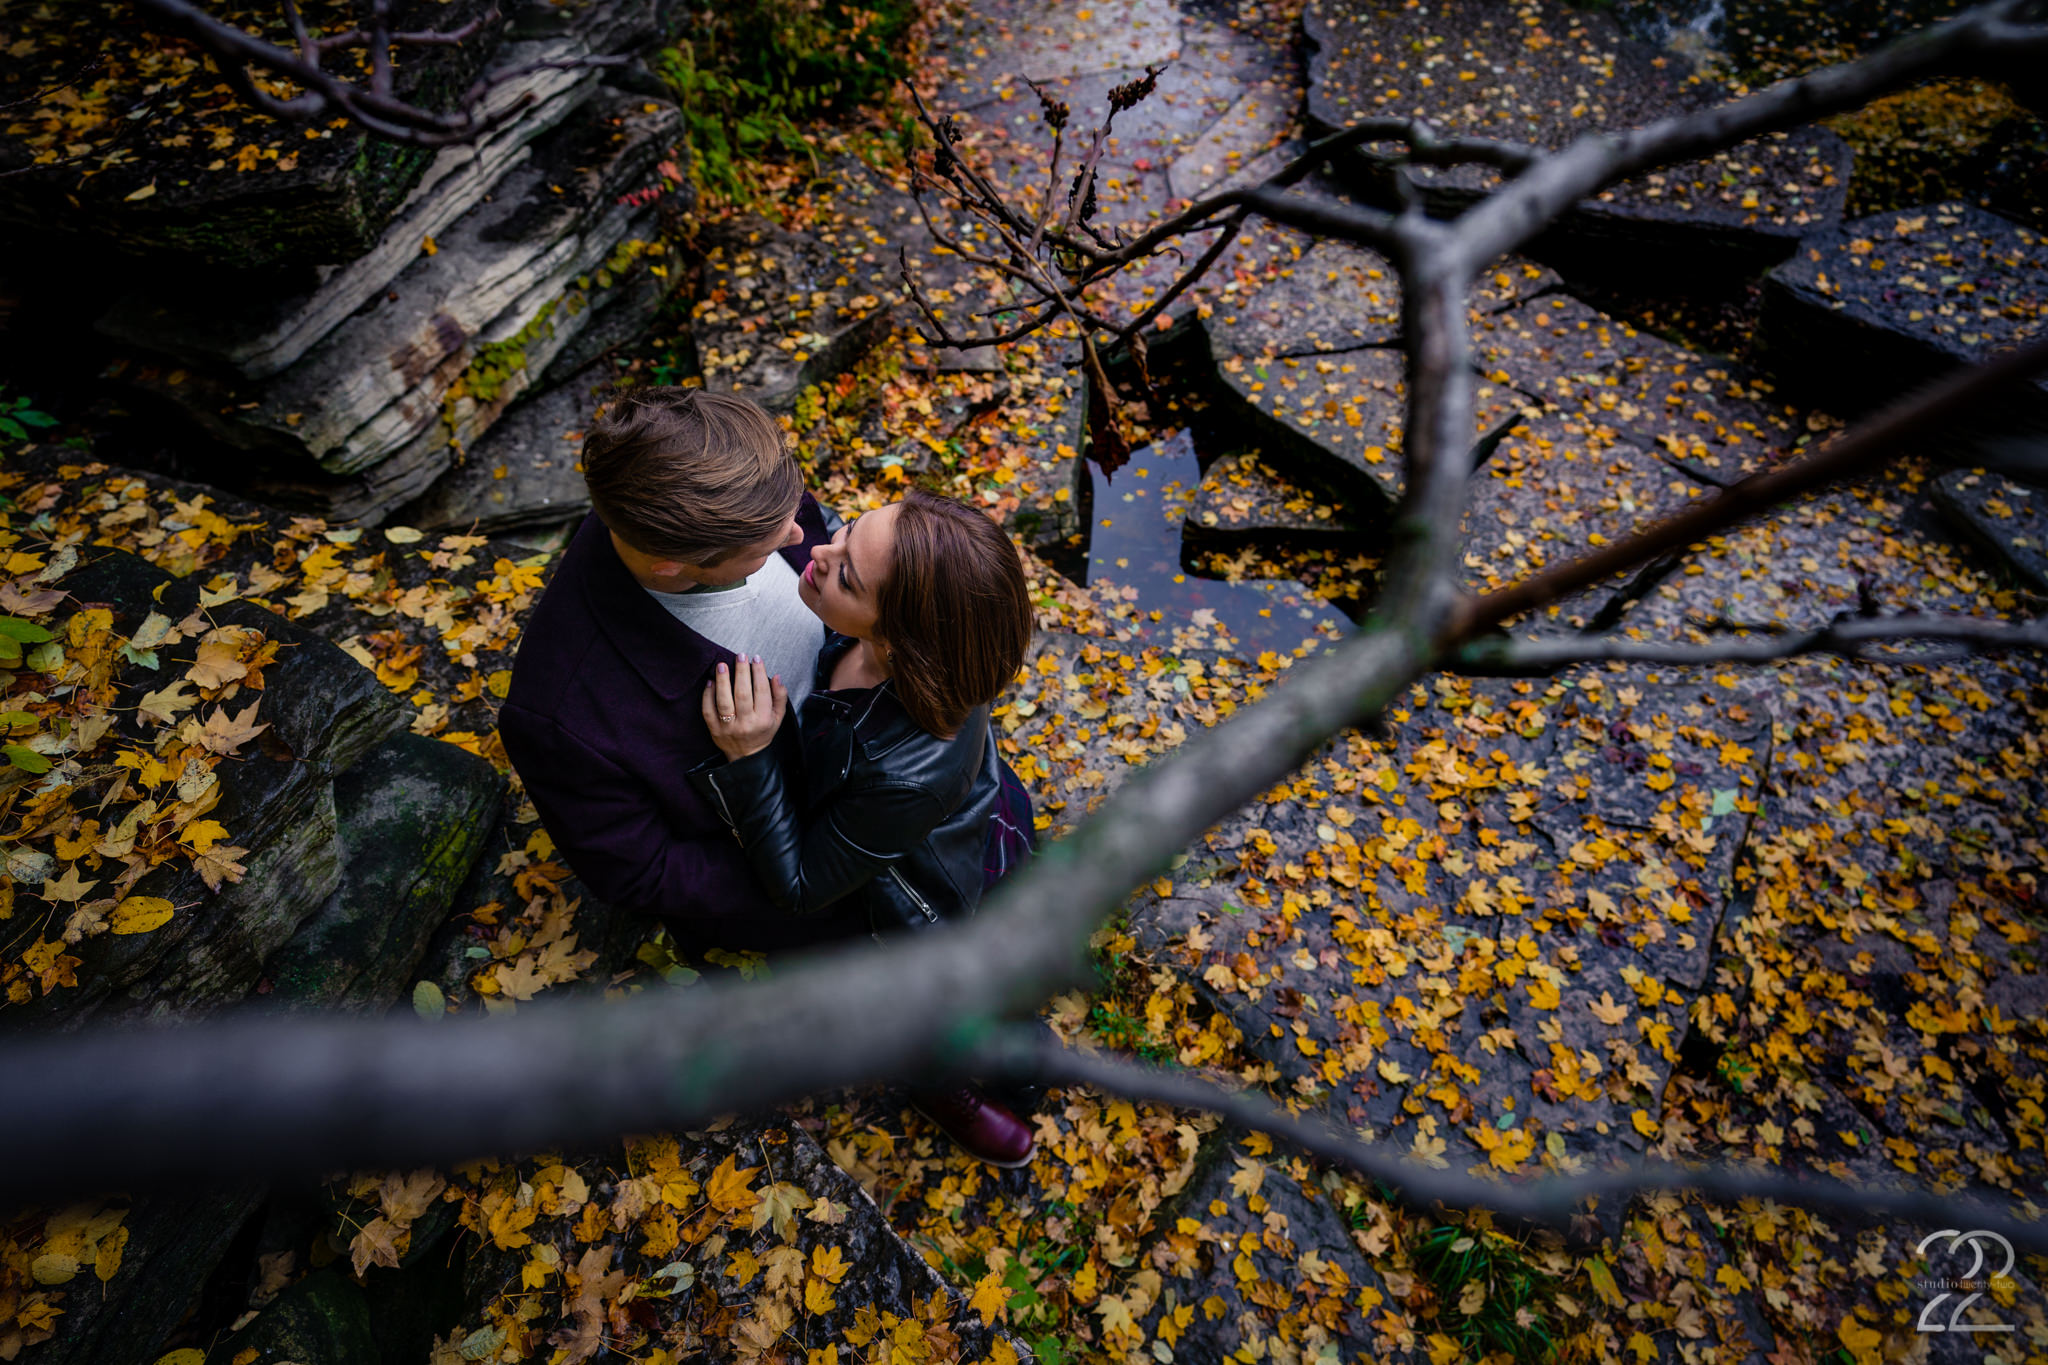  Cool October days, freshly fallen leaves and steamy love between Karlee and Patrick made for perfect Chicago engagement photos. Sometimes it just takes a creative eye and a couple who trust you to make magic happen. 